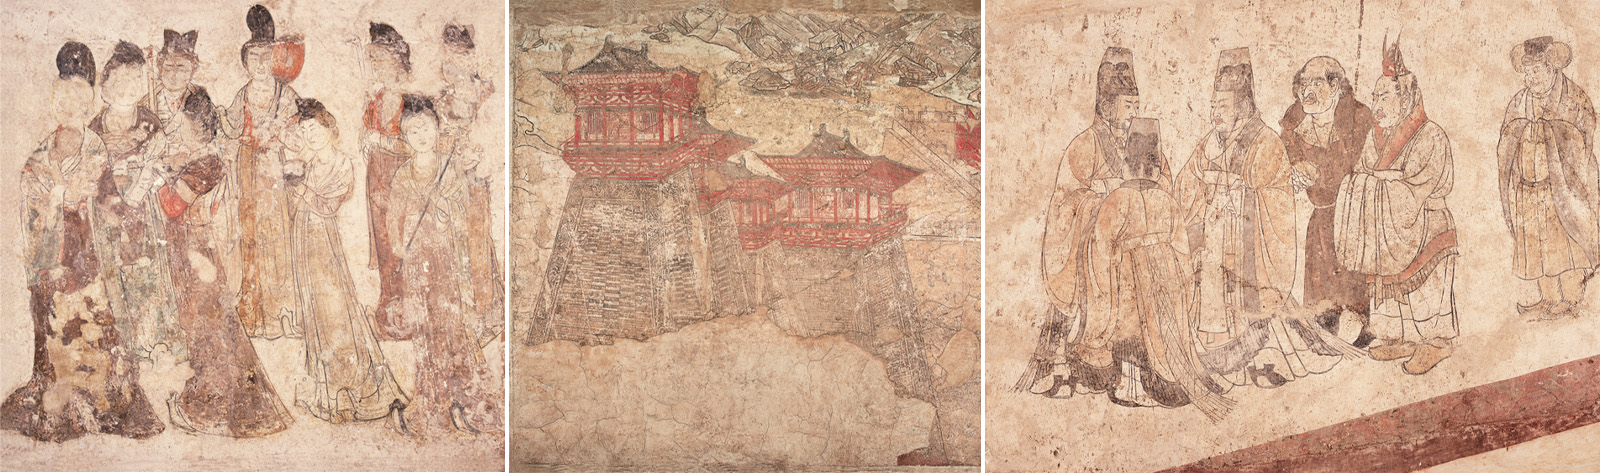 Selected murals from “A Glimpse of Tang Prosperity from Murals – The Exhibition Tour on Murals of the Tang Dynasty”.